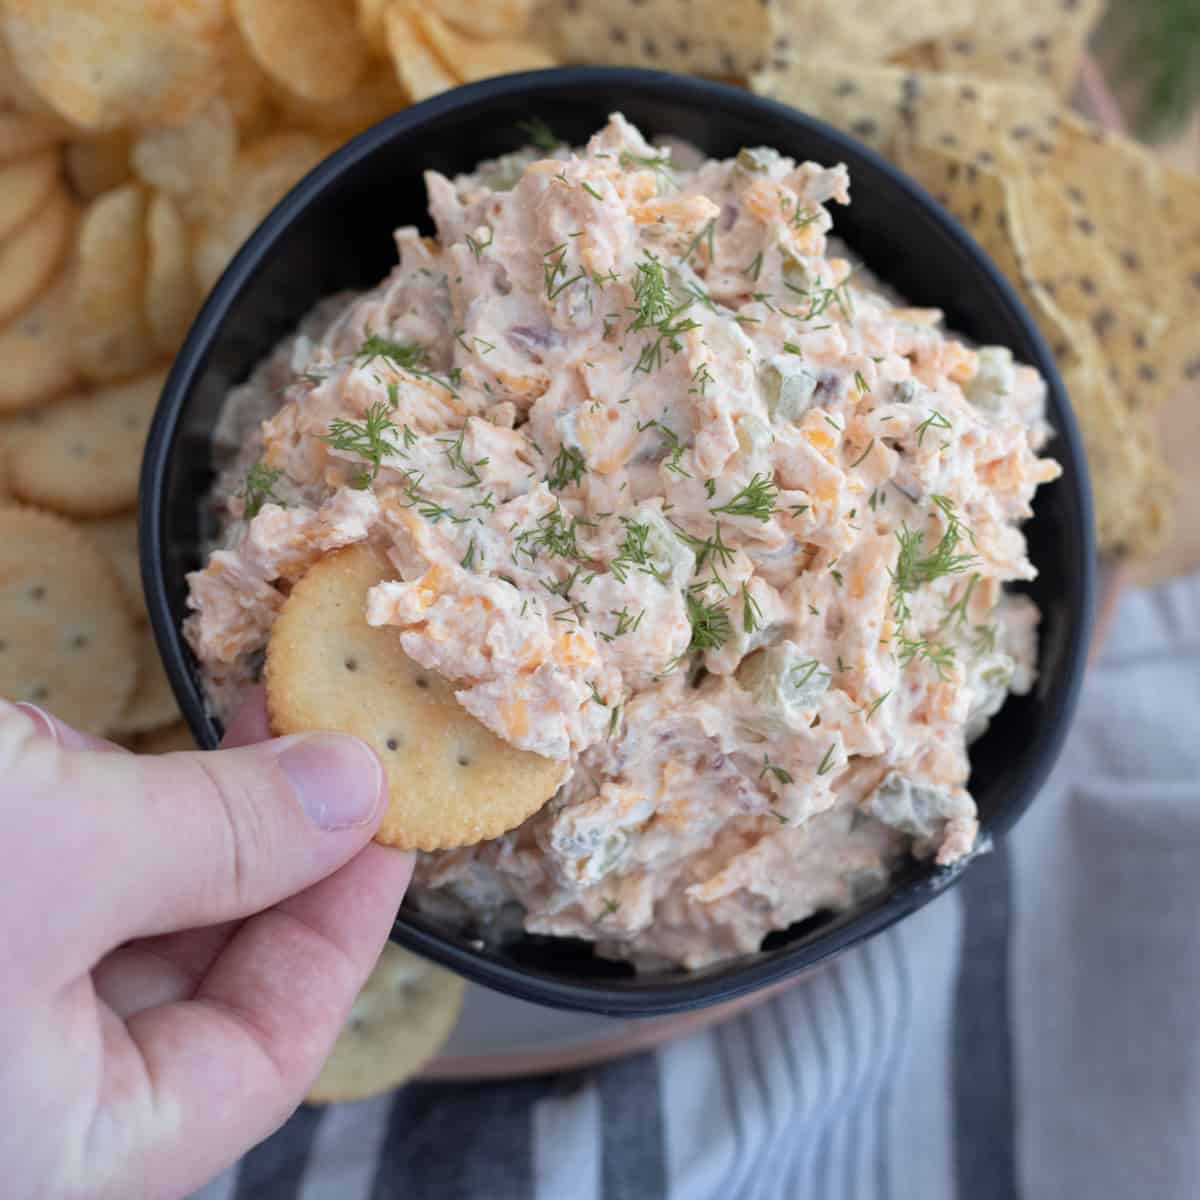 A bowl of pickle popper dip with a cracker being dipped into it.